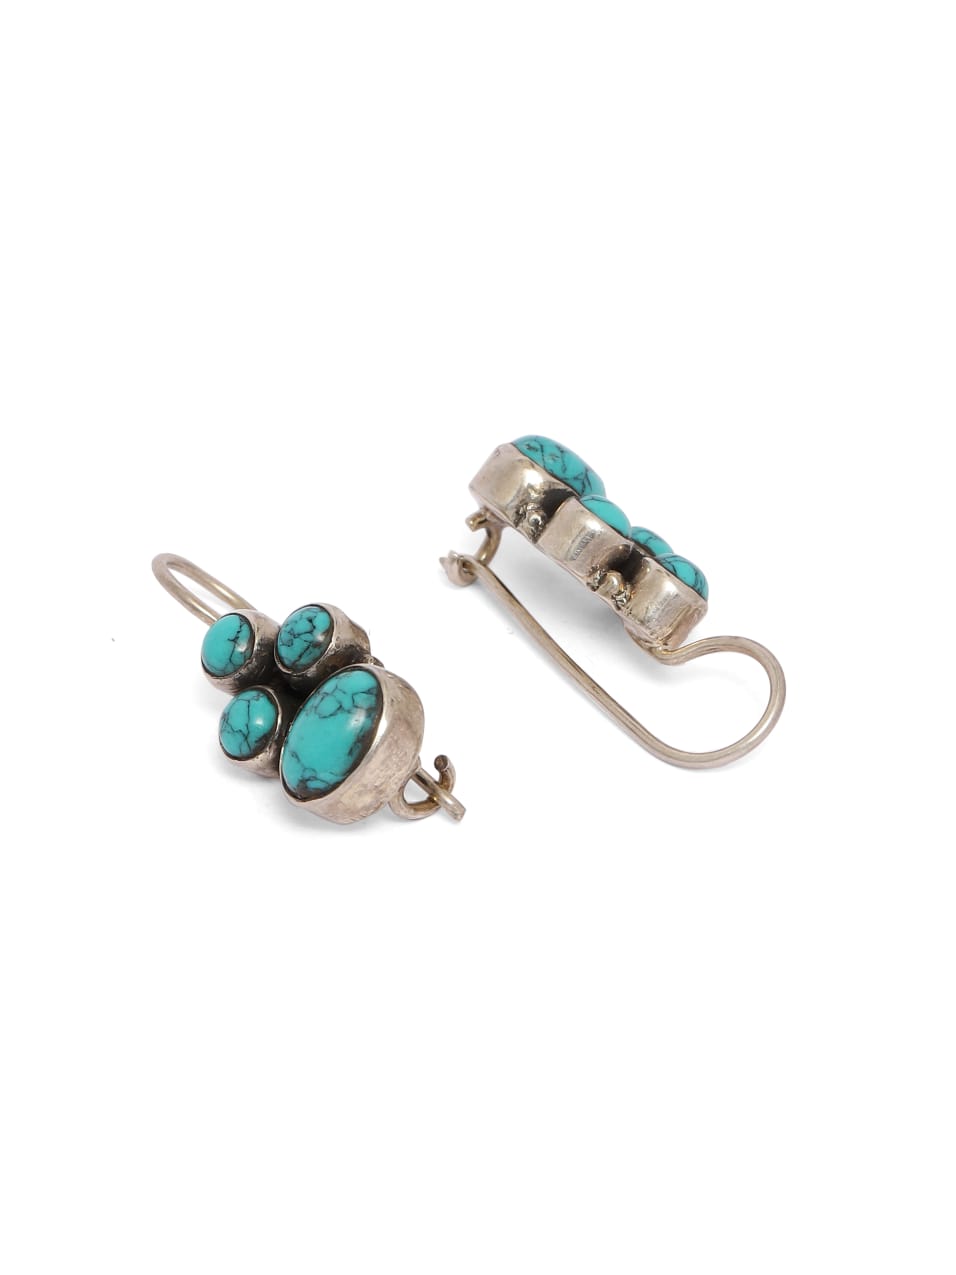 92.5 Sterling Silver Turquoise oval round hook earrings.